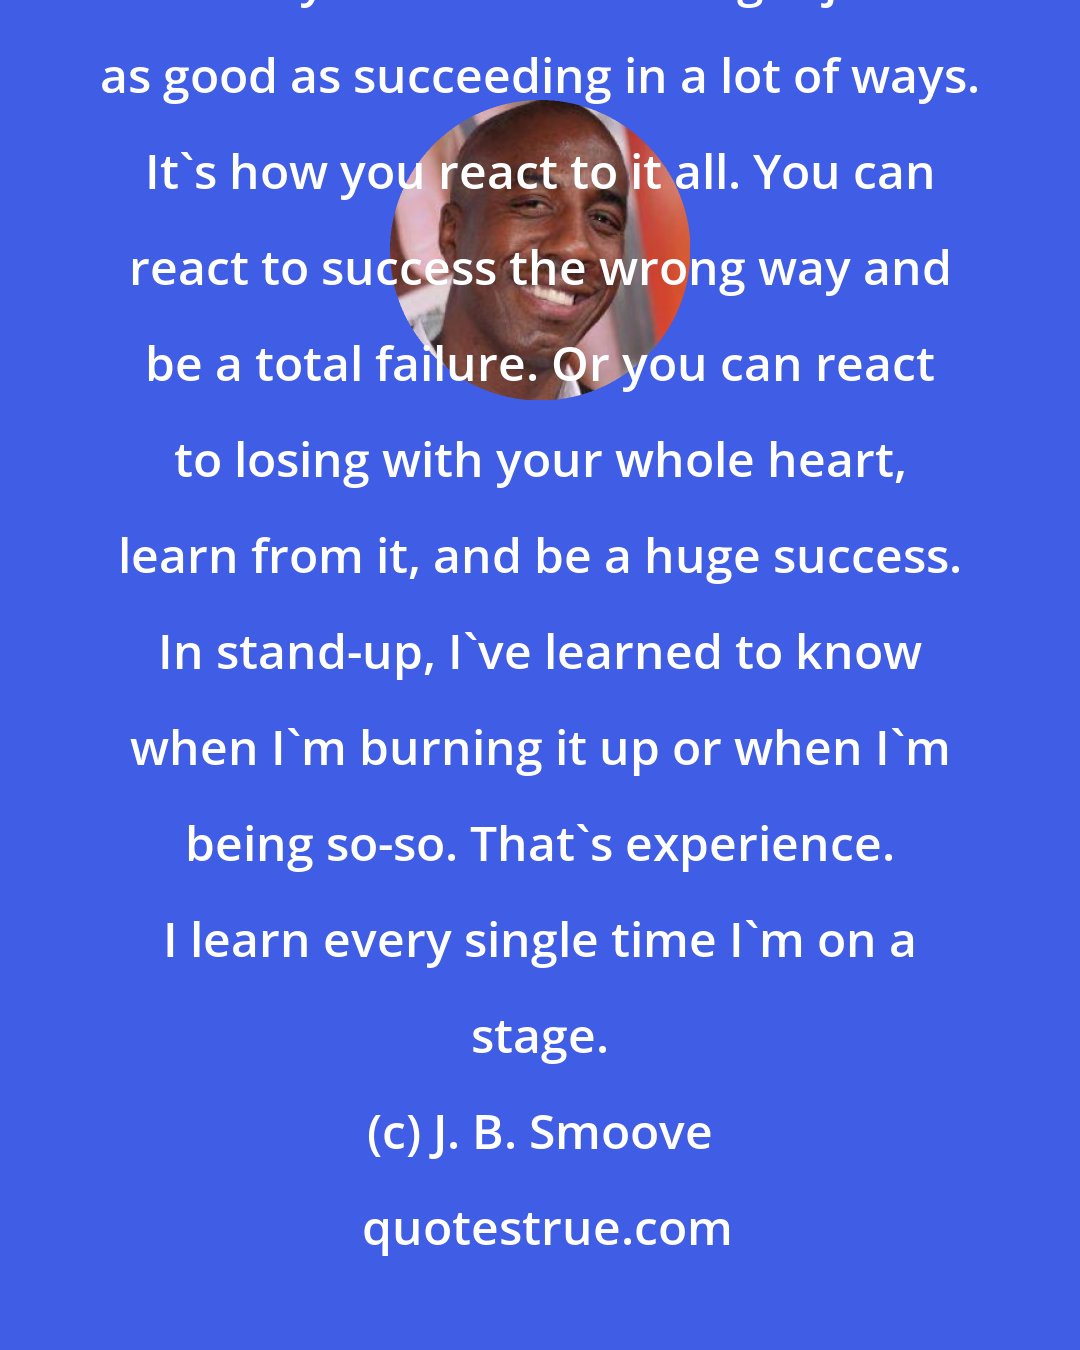 J. B. Smoove: You have to fail, man, but you cannot allow failure to stop you from doing what you must do. Failing is just as good as succeeding in a lot of ways. It's how you react to it all. You can react to success the wrong way and be a total failure. Or you can react to losing with your whole heart, learn from it, and be a huge success. In stand-up, I've learned to know when I'm burning it up or when I'm being so-so. That's experience. I learn every single time I'm on a stage.